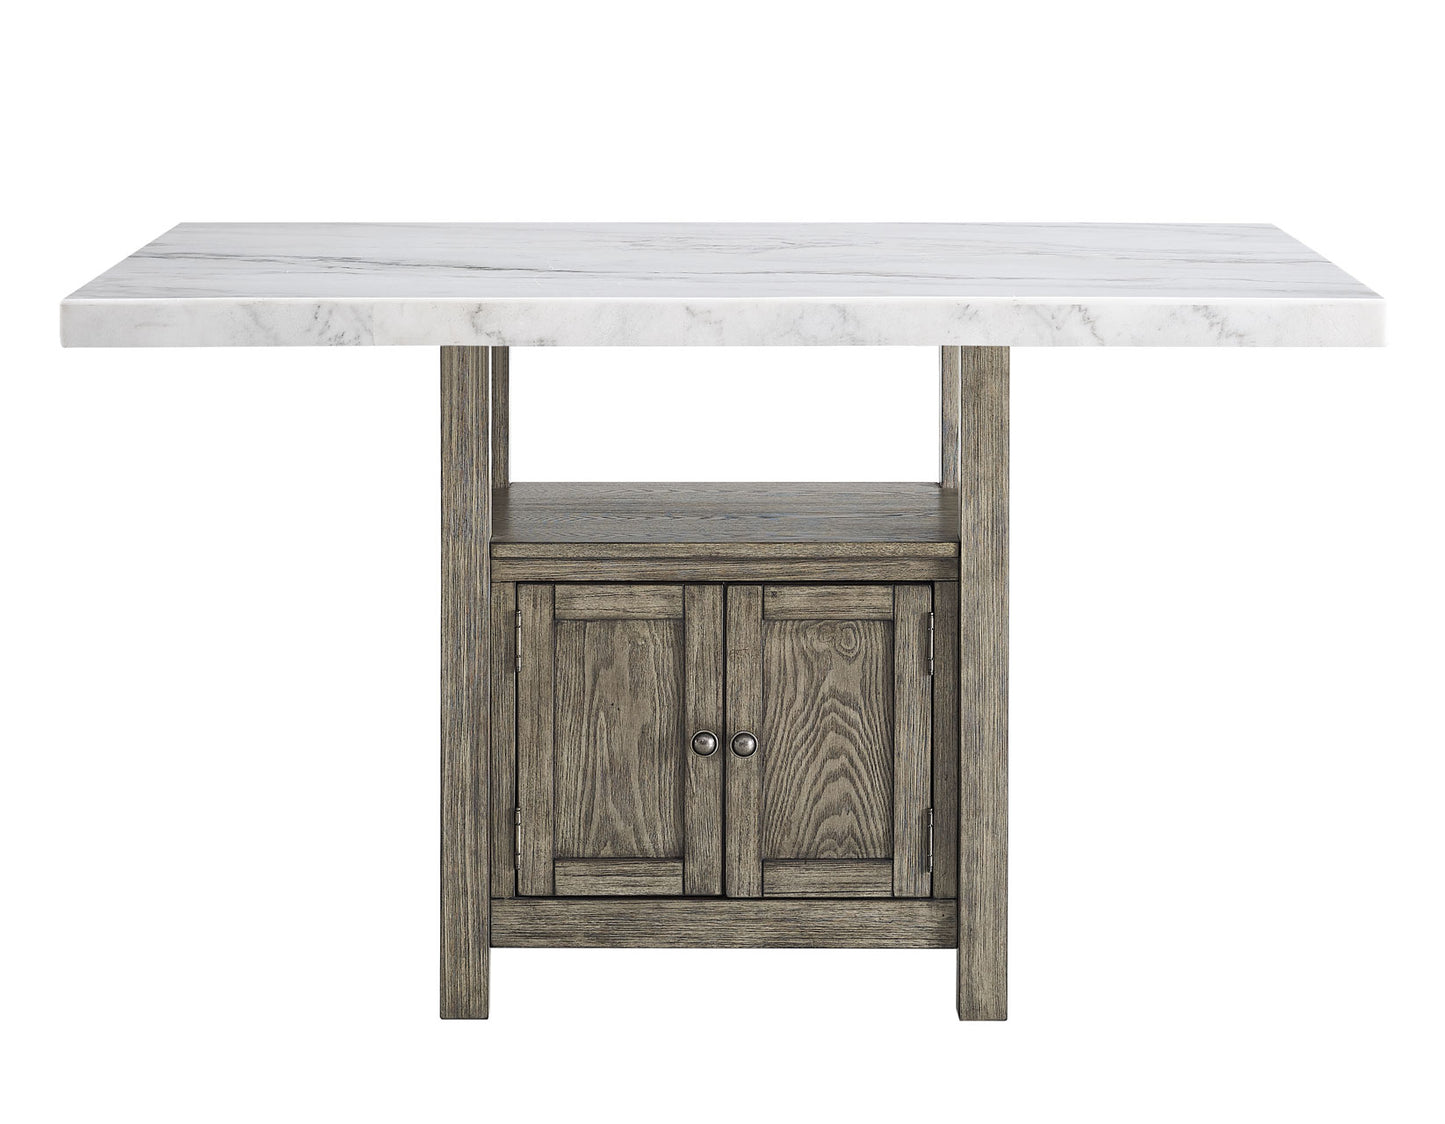 Grayson 6 Piece White Marble Top Counter Set
(Counter Table, Counter Bench & 4 Counter Chairs)